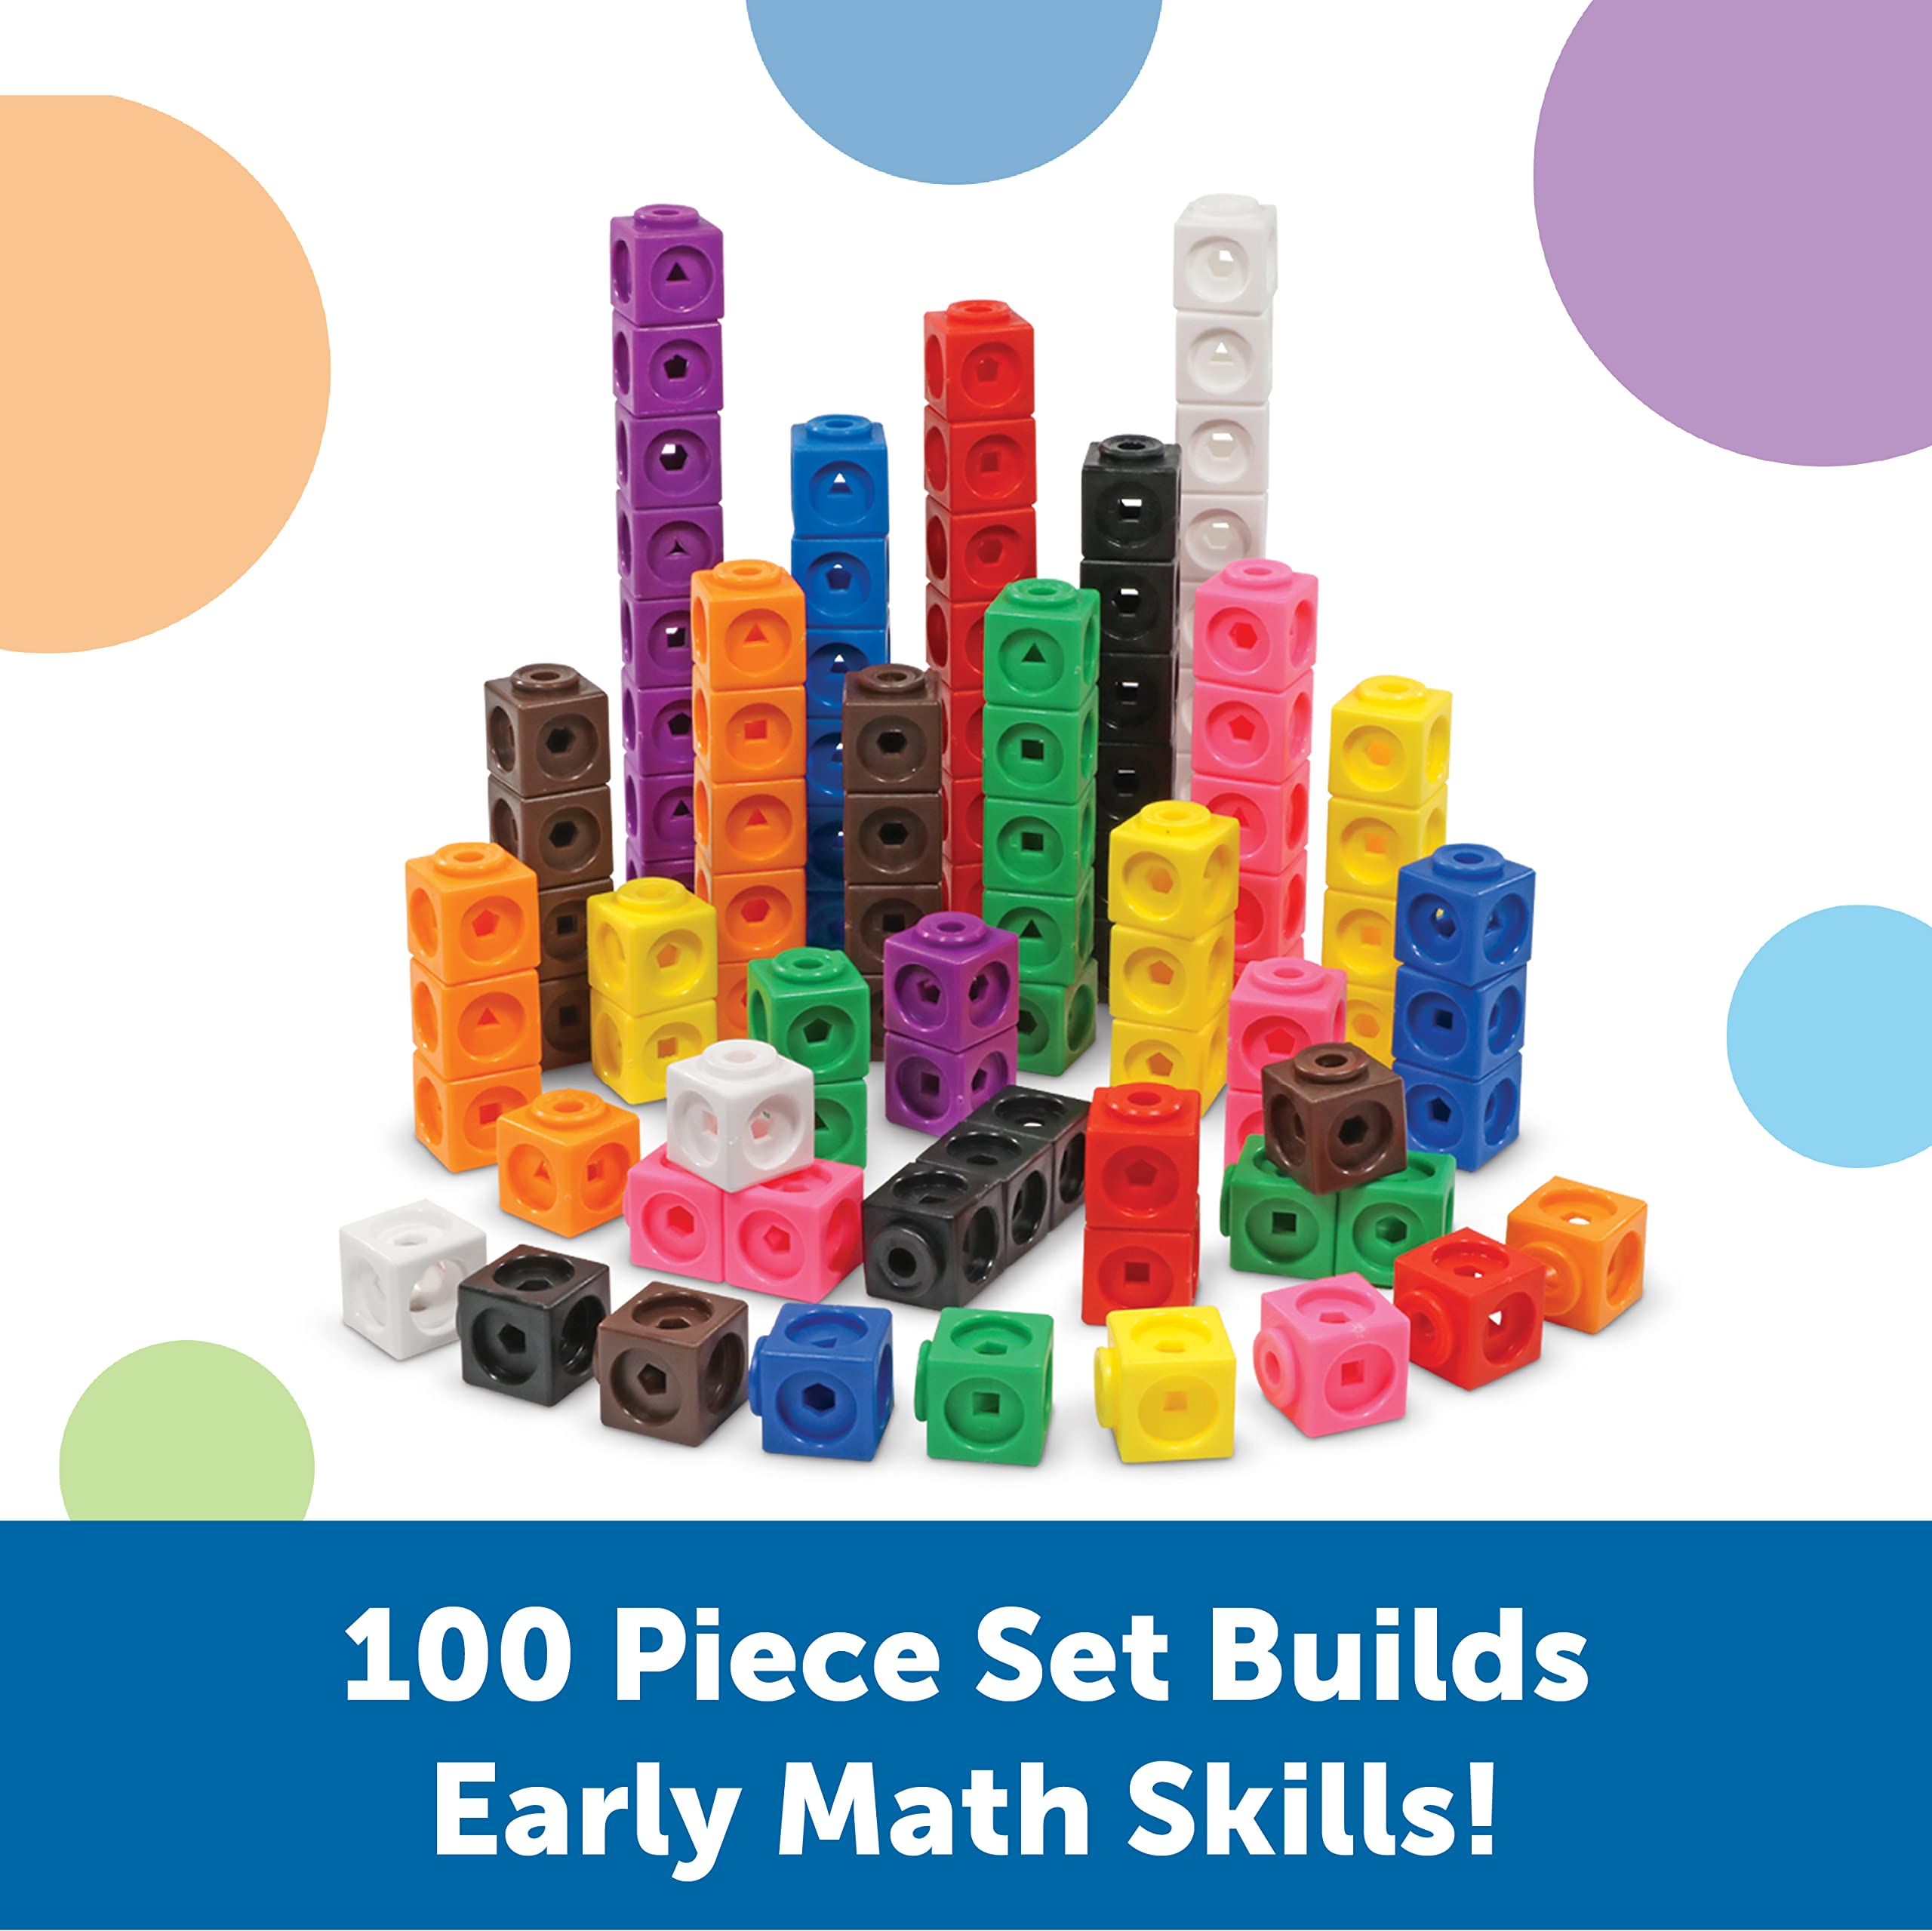 Learning Resources Mathlink Cubes, Educational Counting Toy, Early Math Skills, Set of 100 Cubes